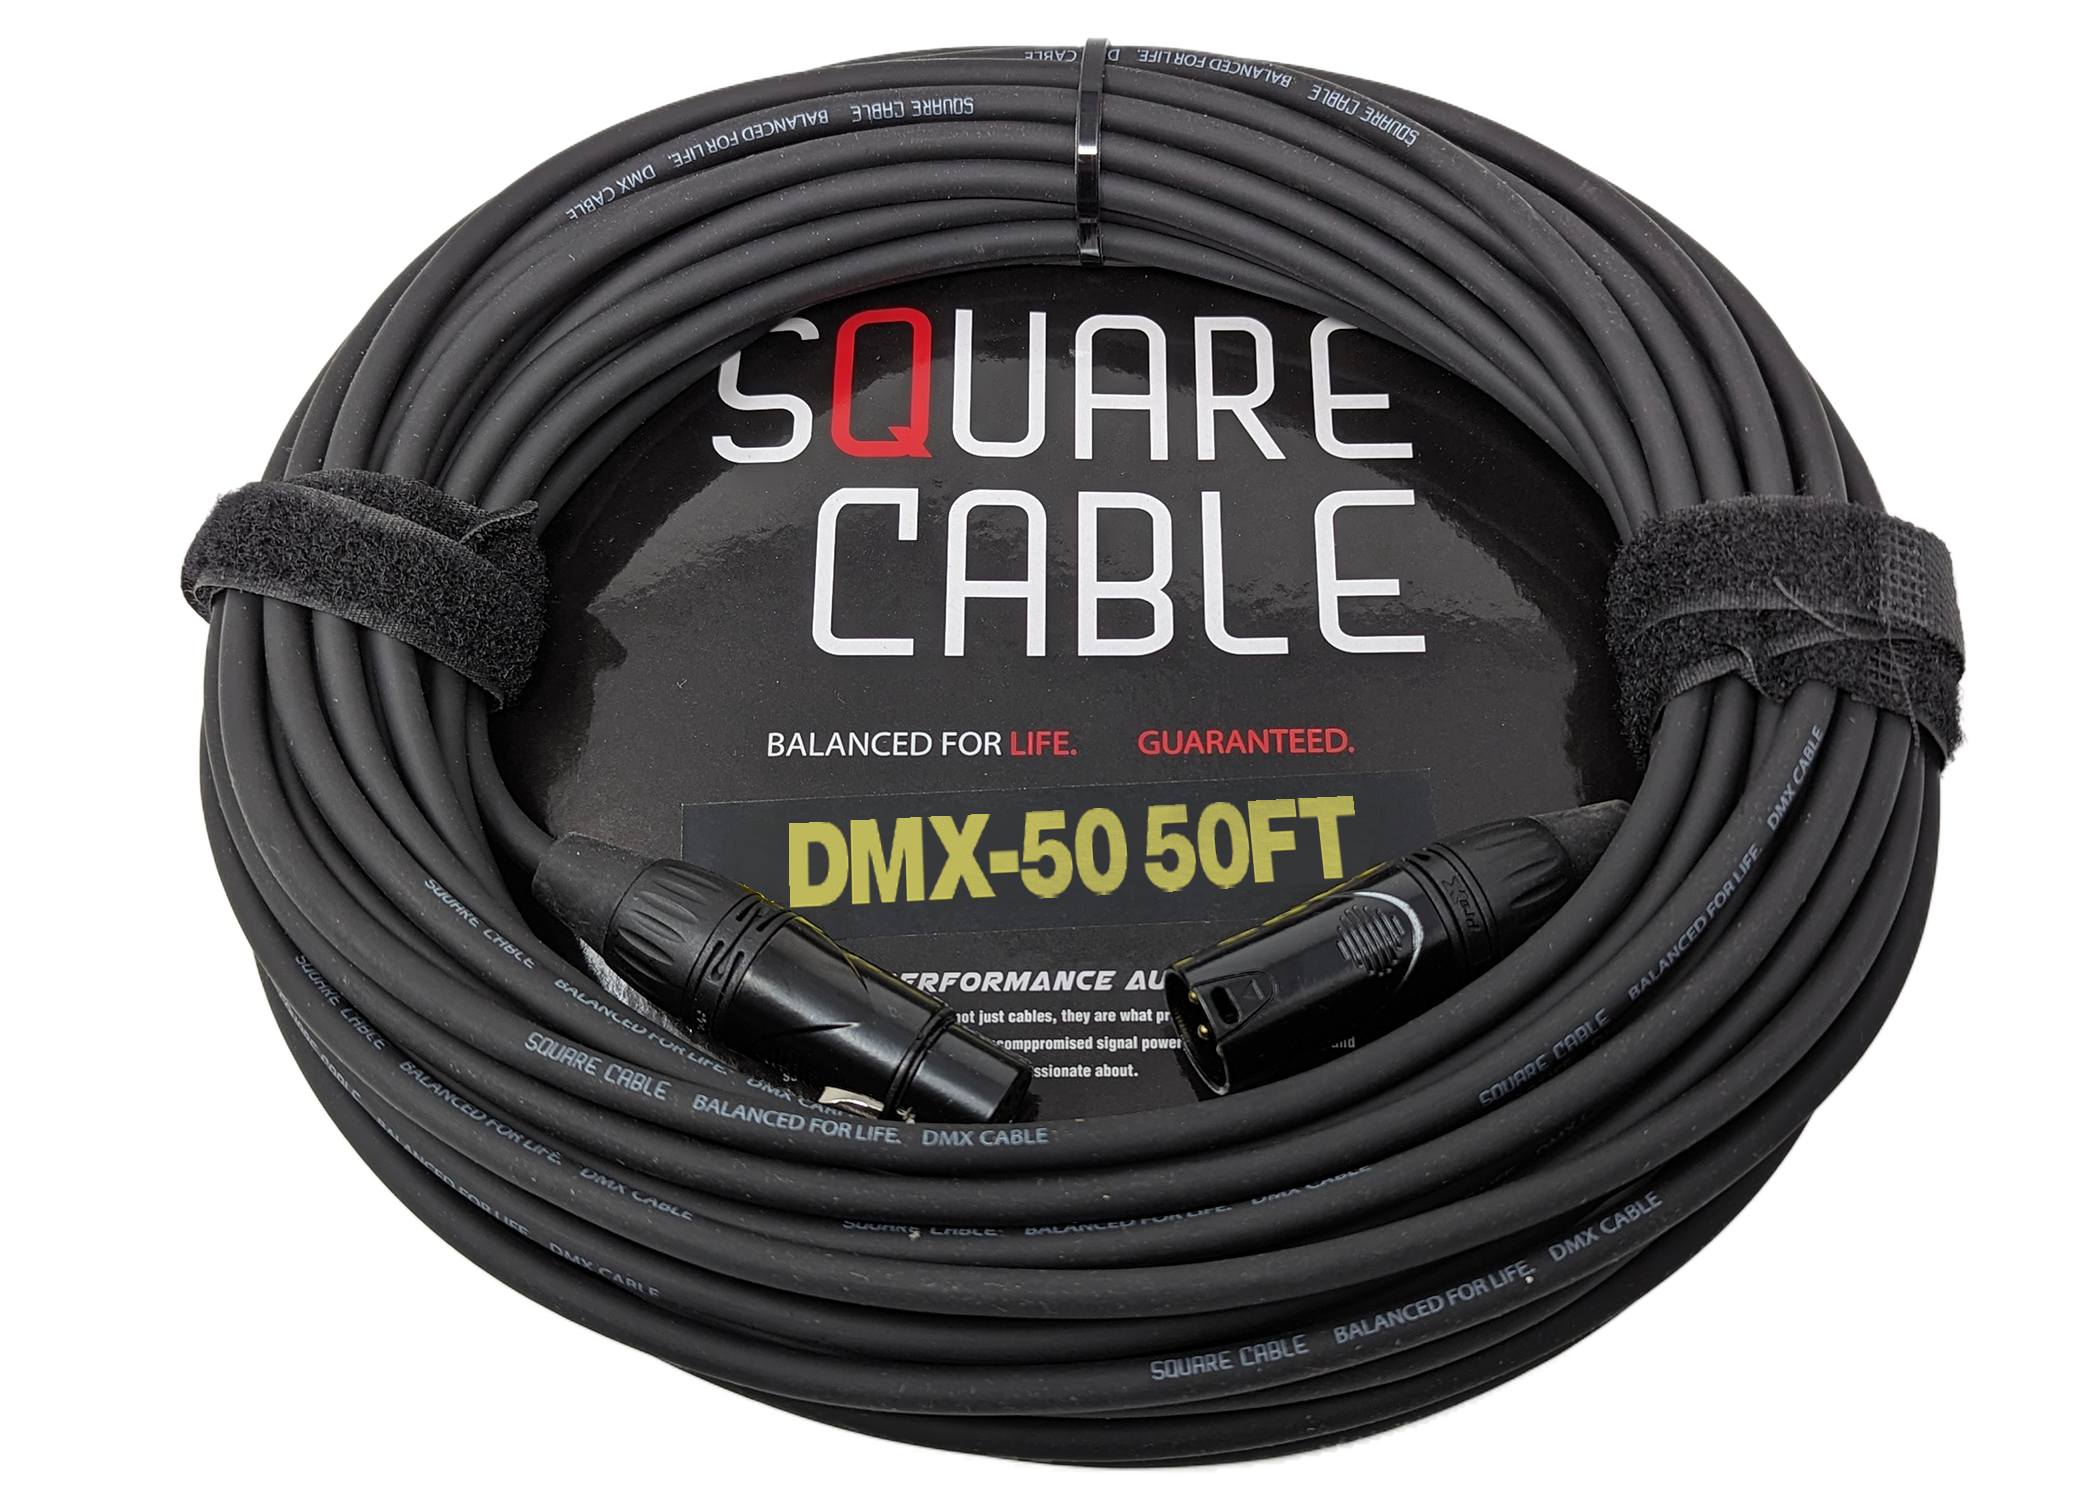 Square Cable DMX-50 | 50ft DMX Cable (3-Pin)